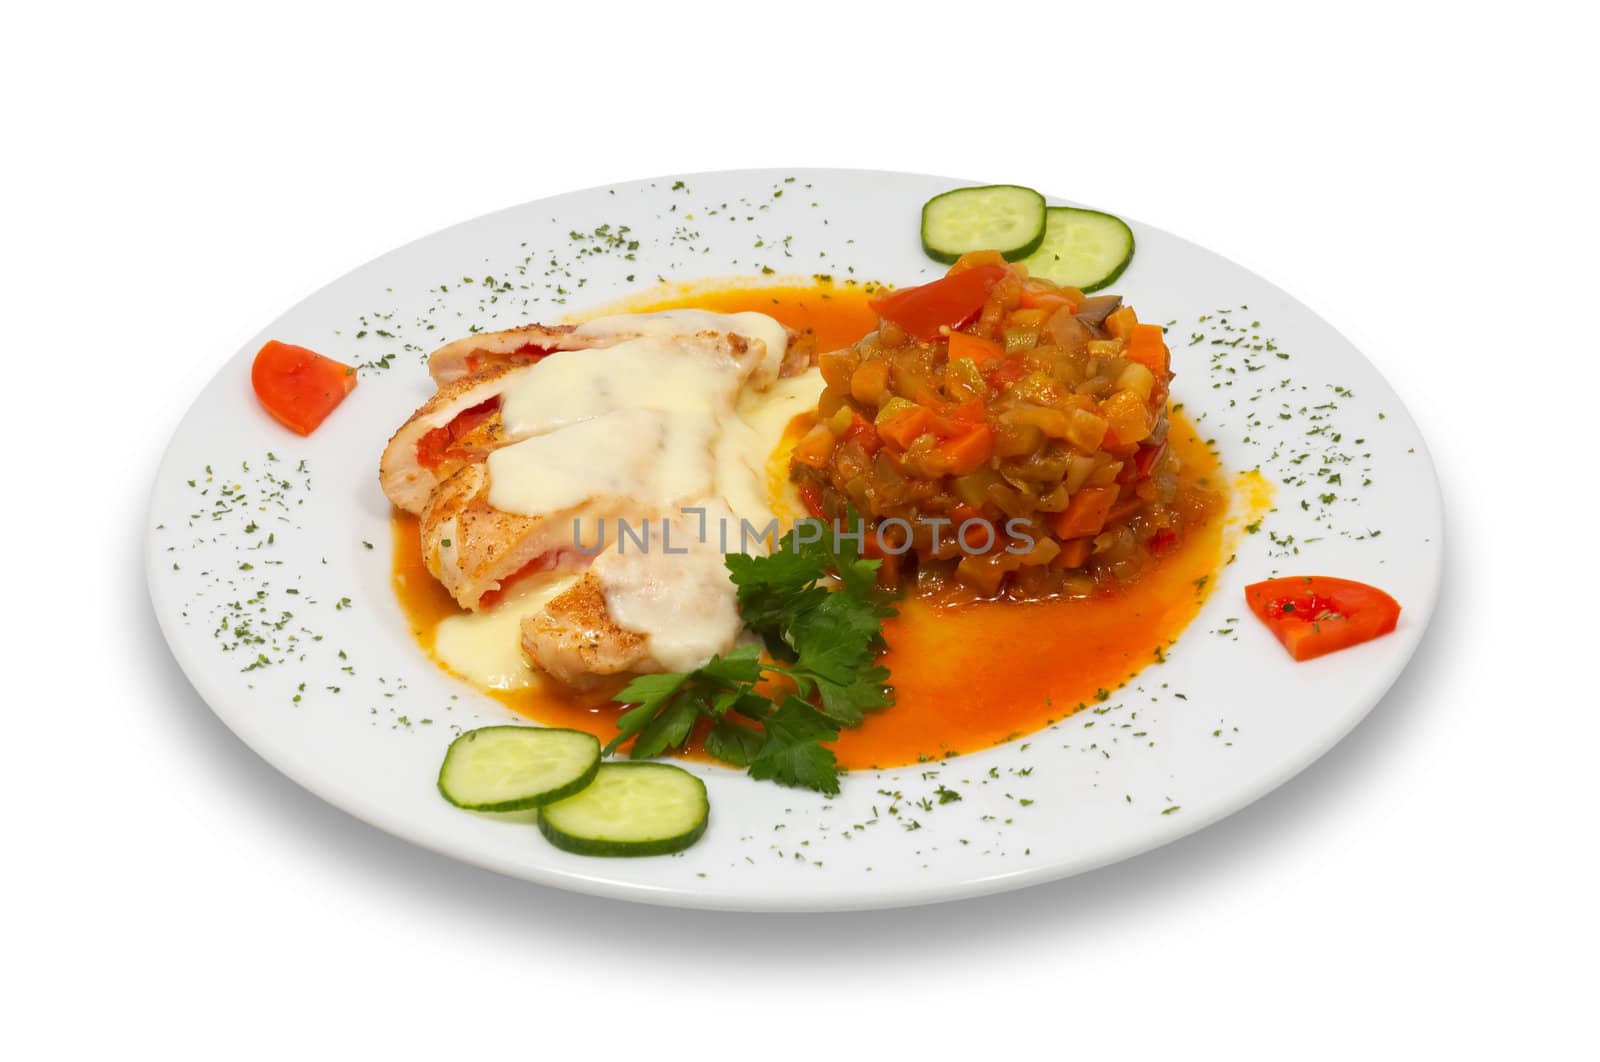 grilled stuffed chicken fillet by starush